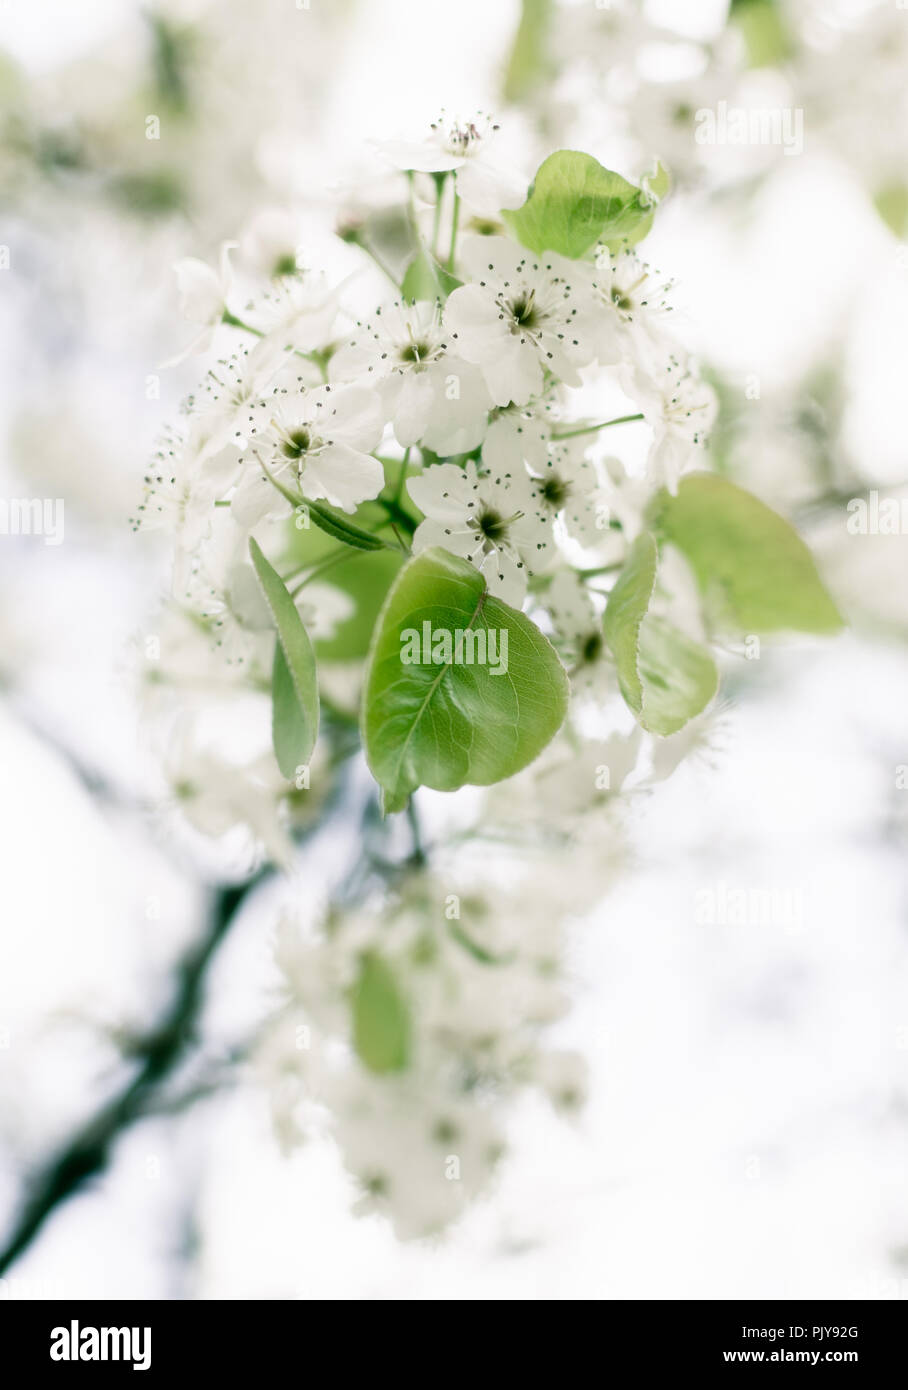 Macro Of The White Blossoms From An Ornamental Pear Tree (Pyrus Calleryana) Stock Photo